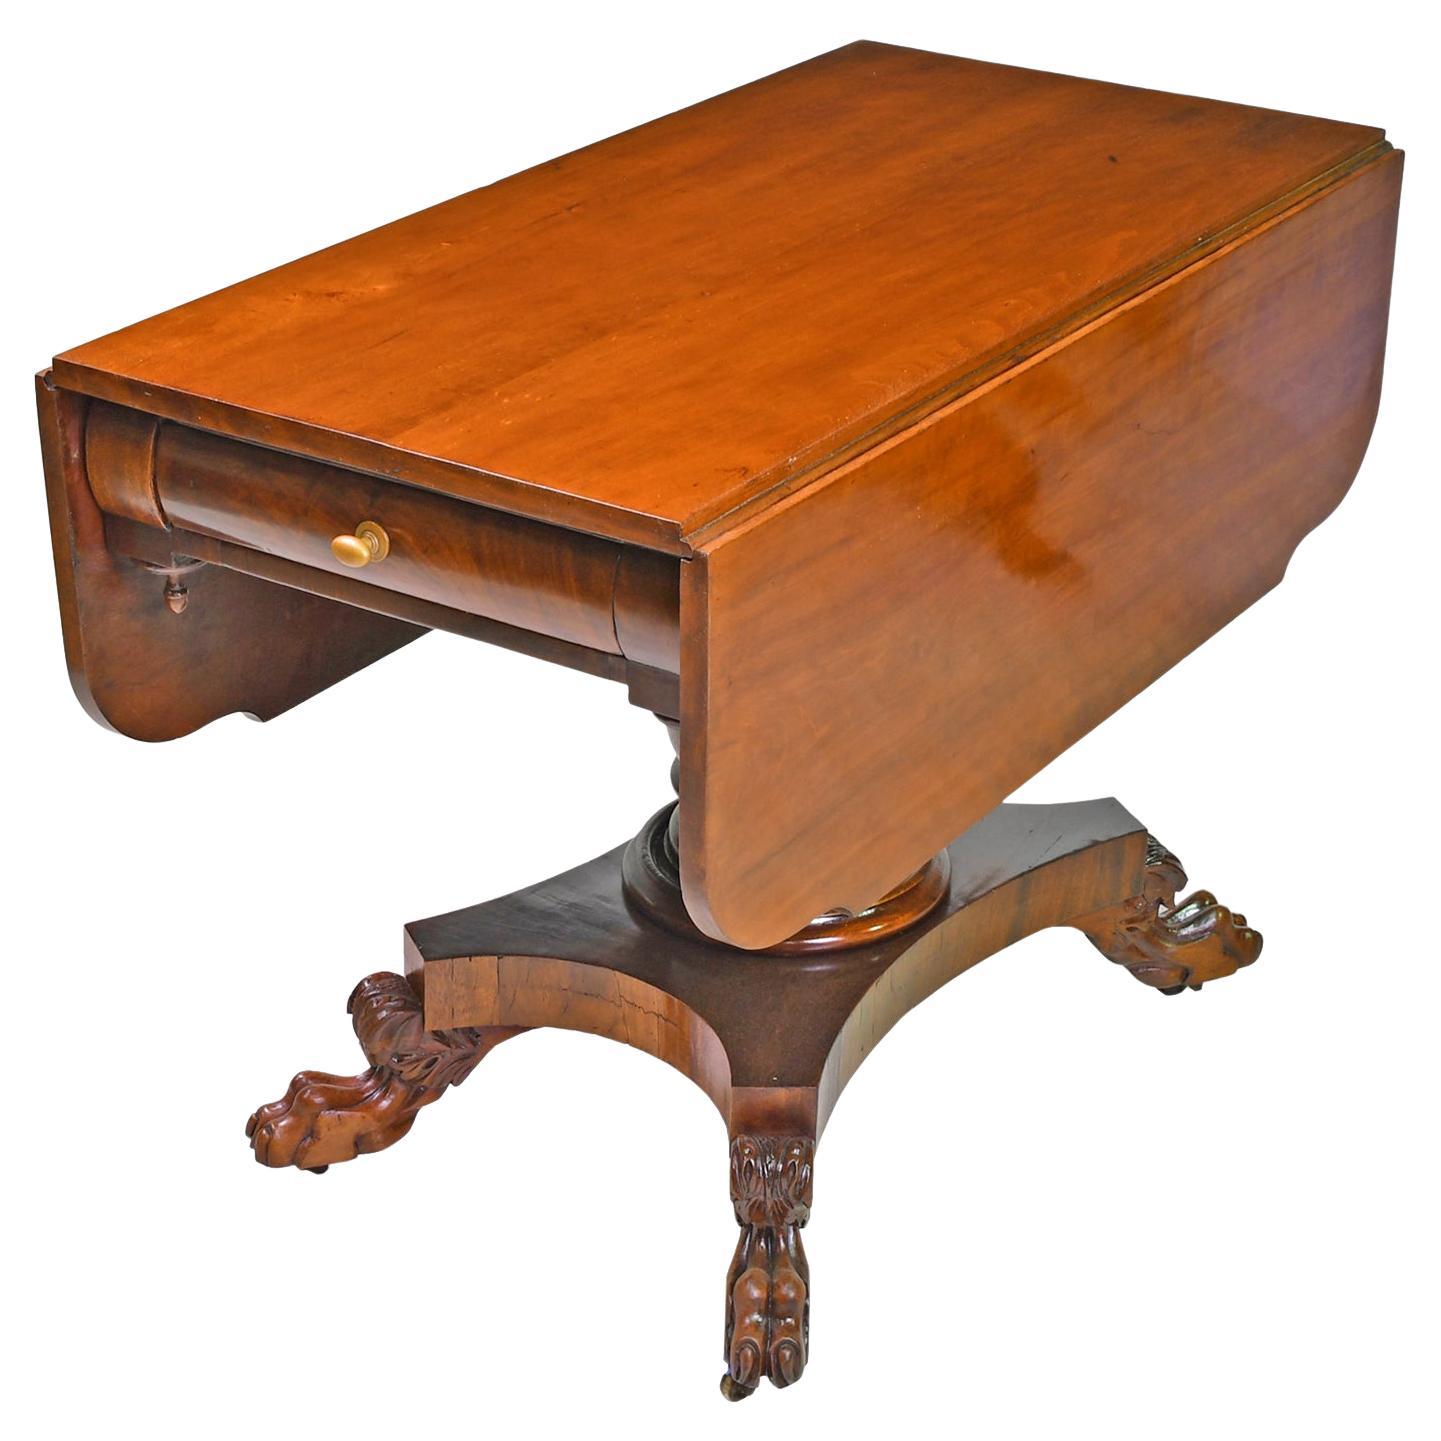 Early American Empire Drop-Leaf/ Pembroke Table in West Indies Mahogany, c. 1830